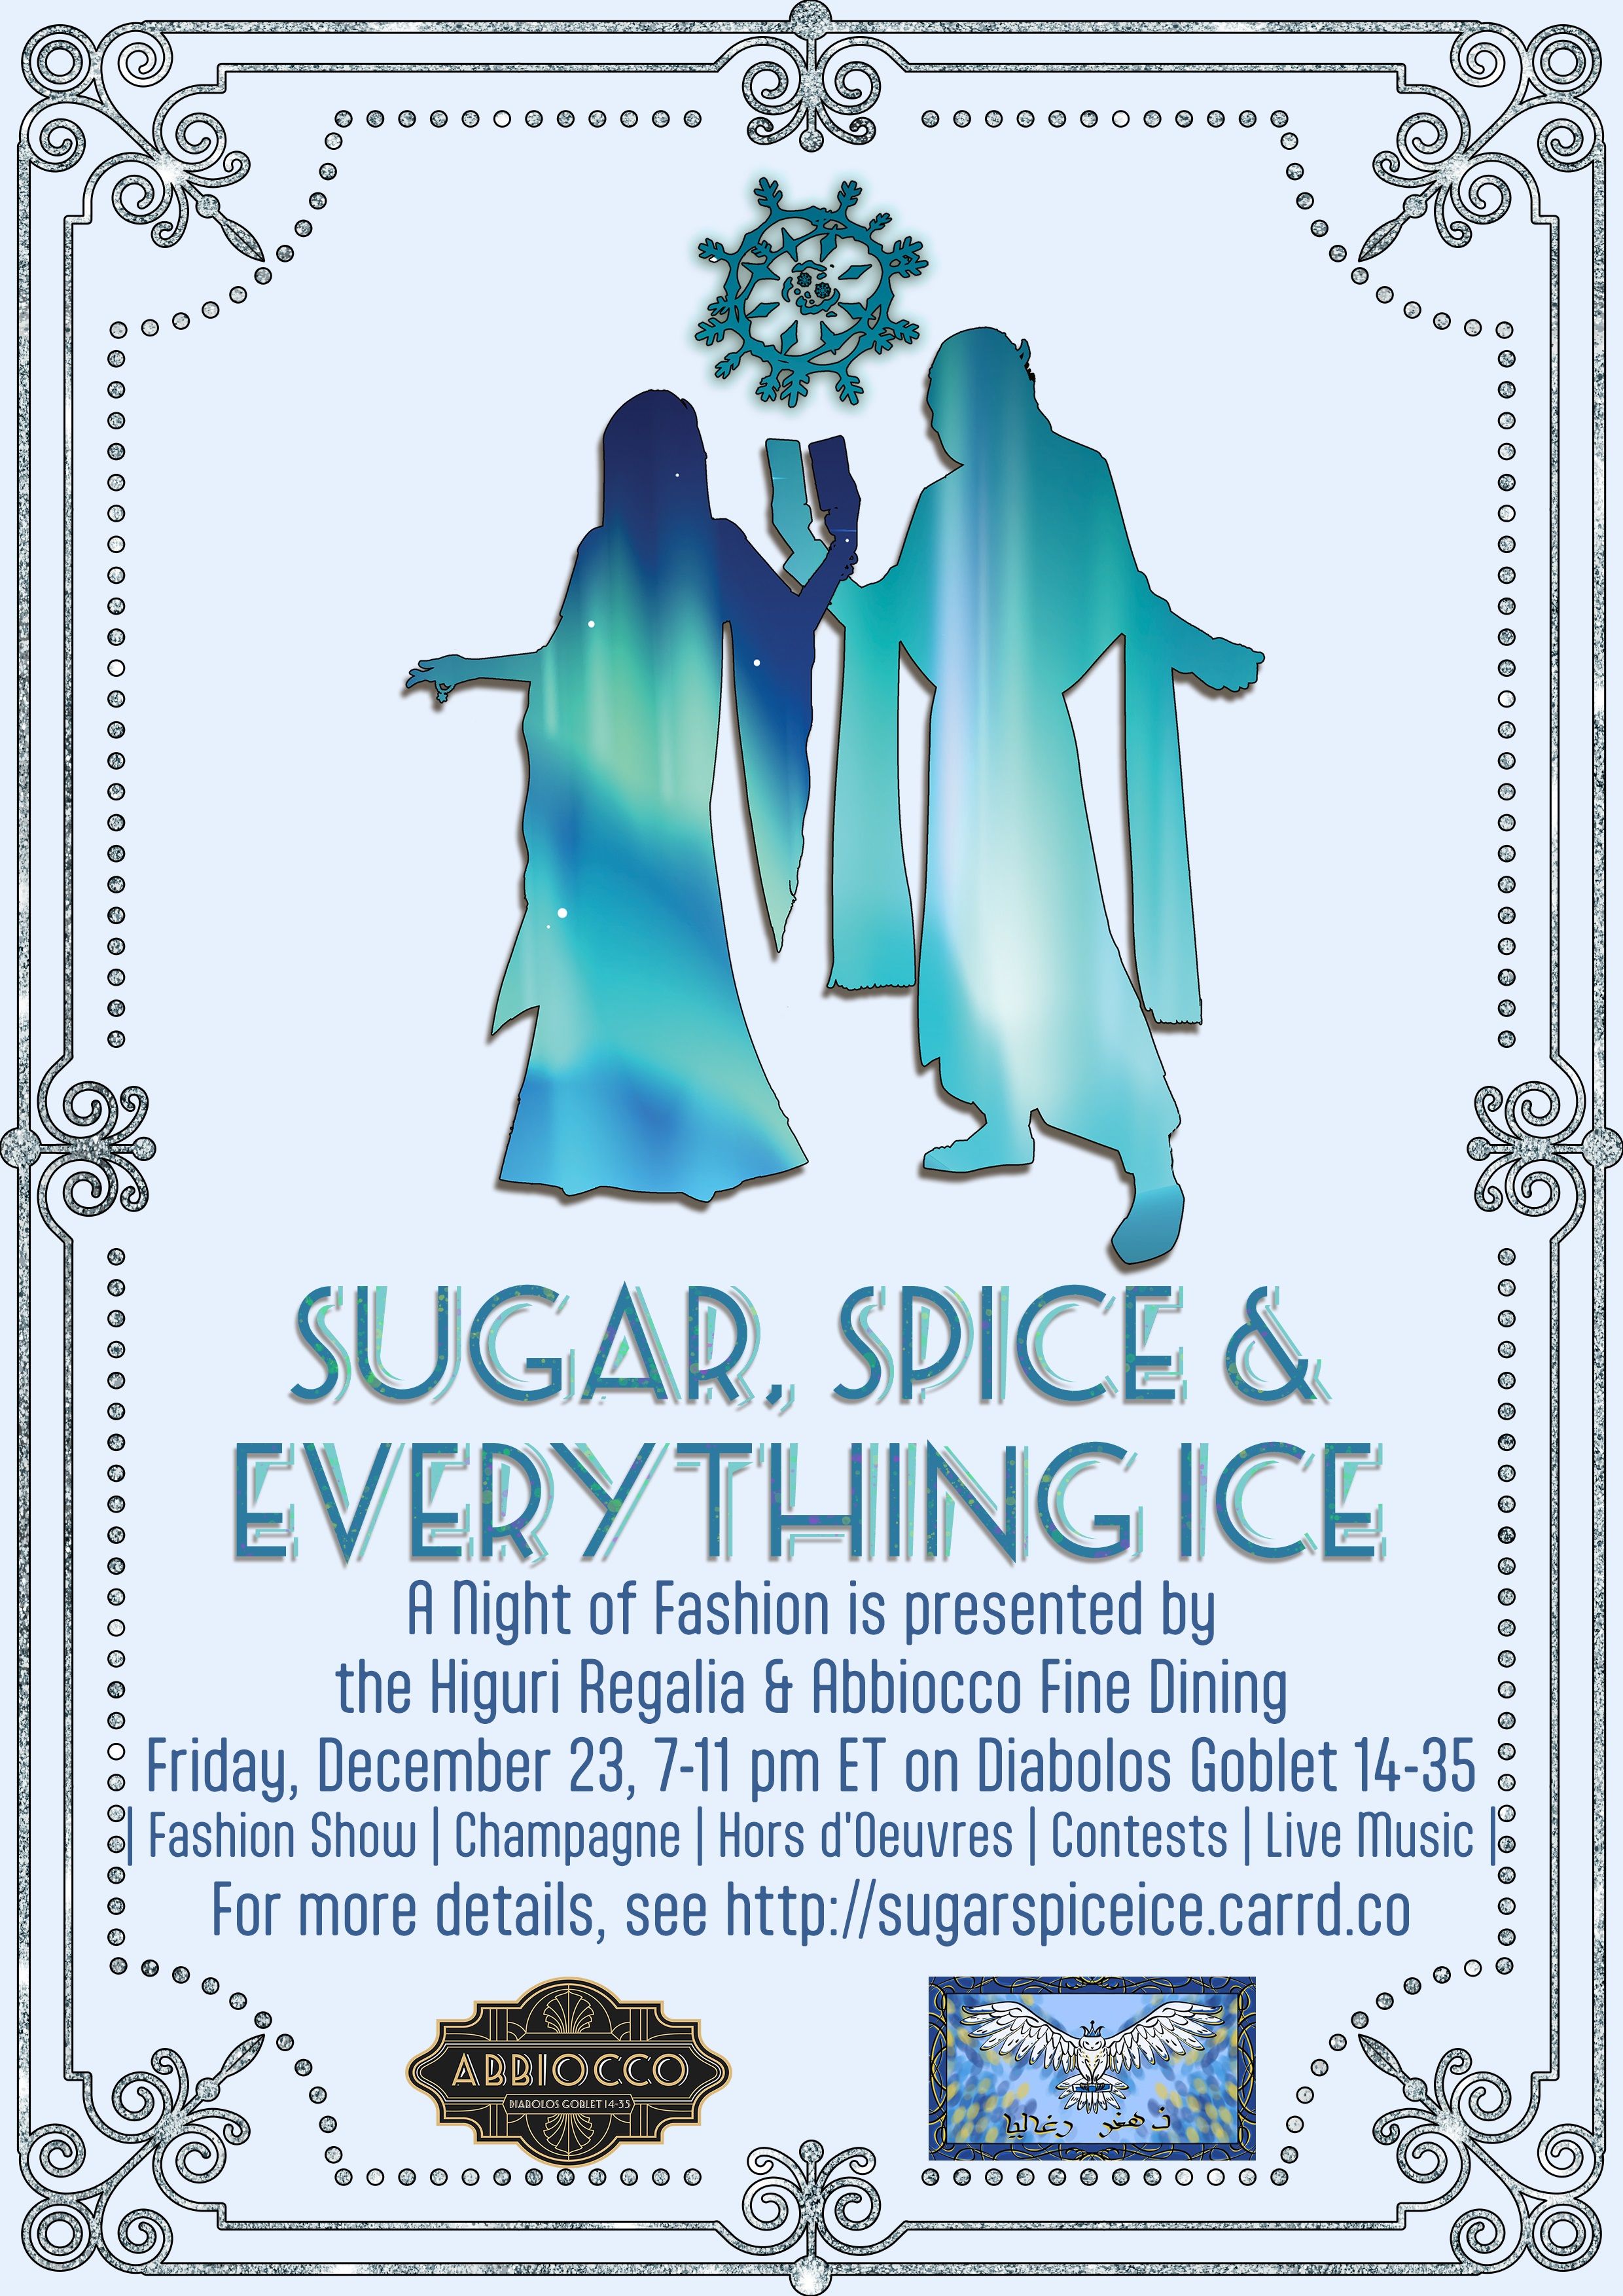 Sugar, Spice & Everything Ice event for FF14 - flyer